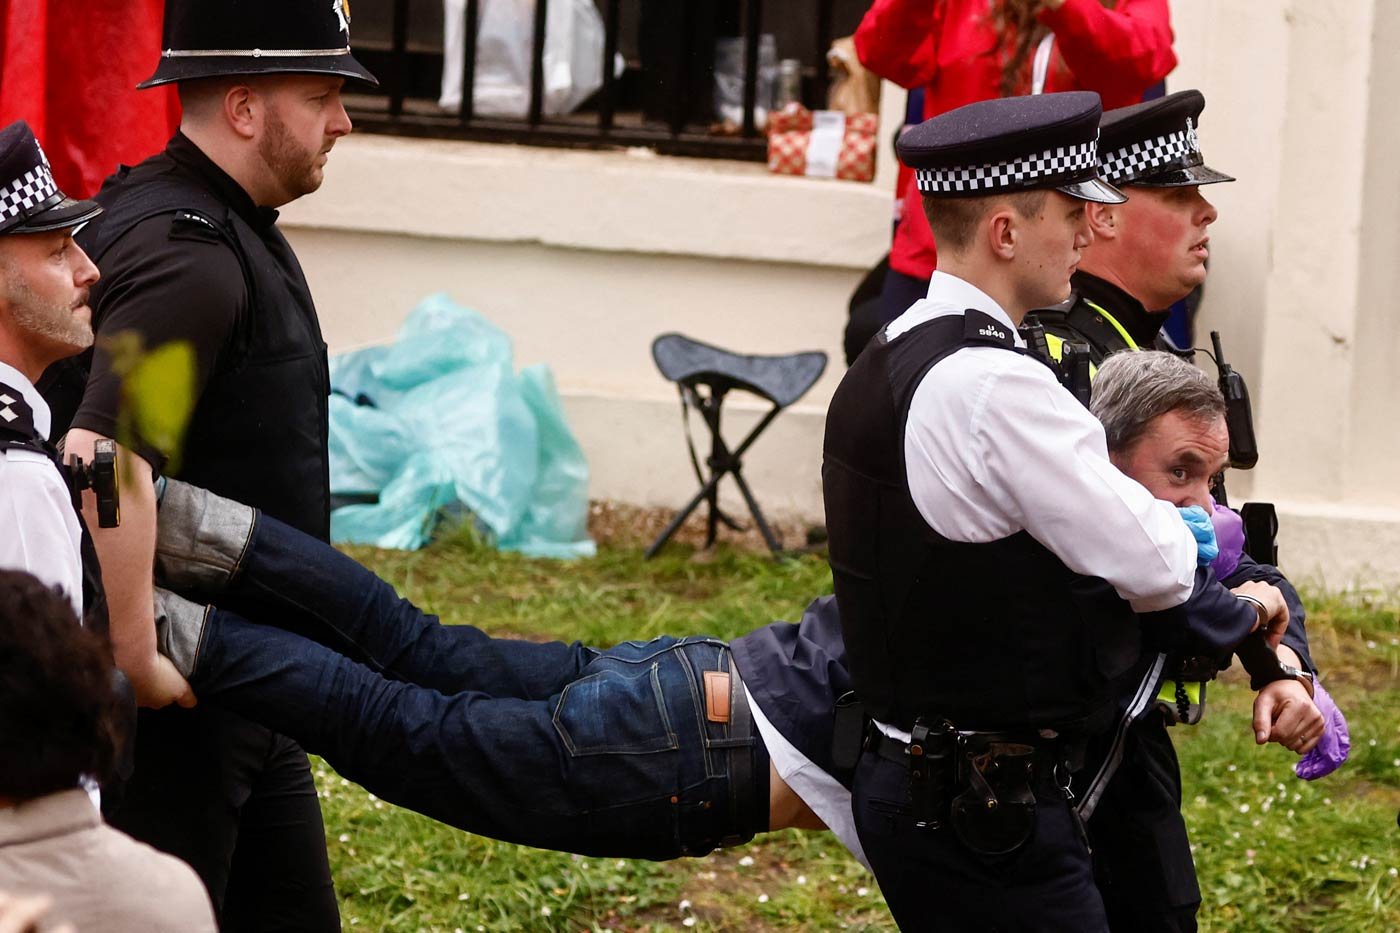 Police officers detain a member of "Just Stop Oil" movement during a protest ahead of the coronation ceremony